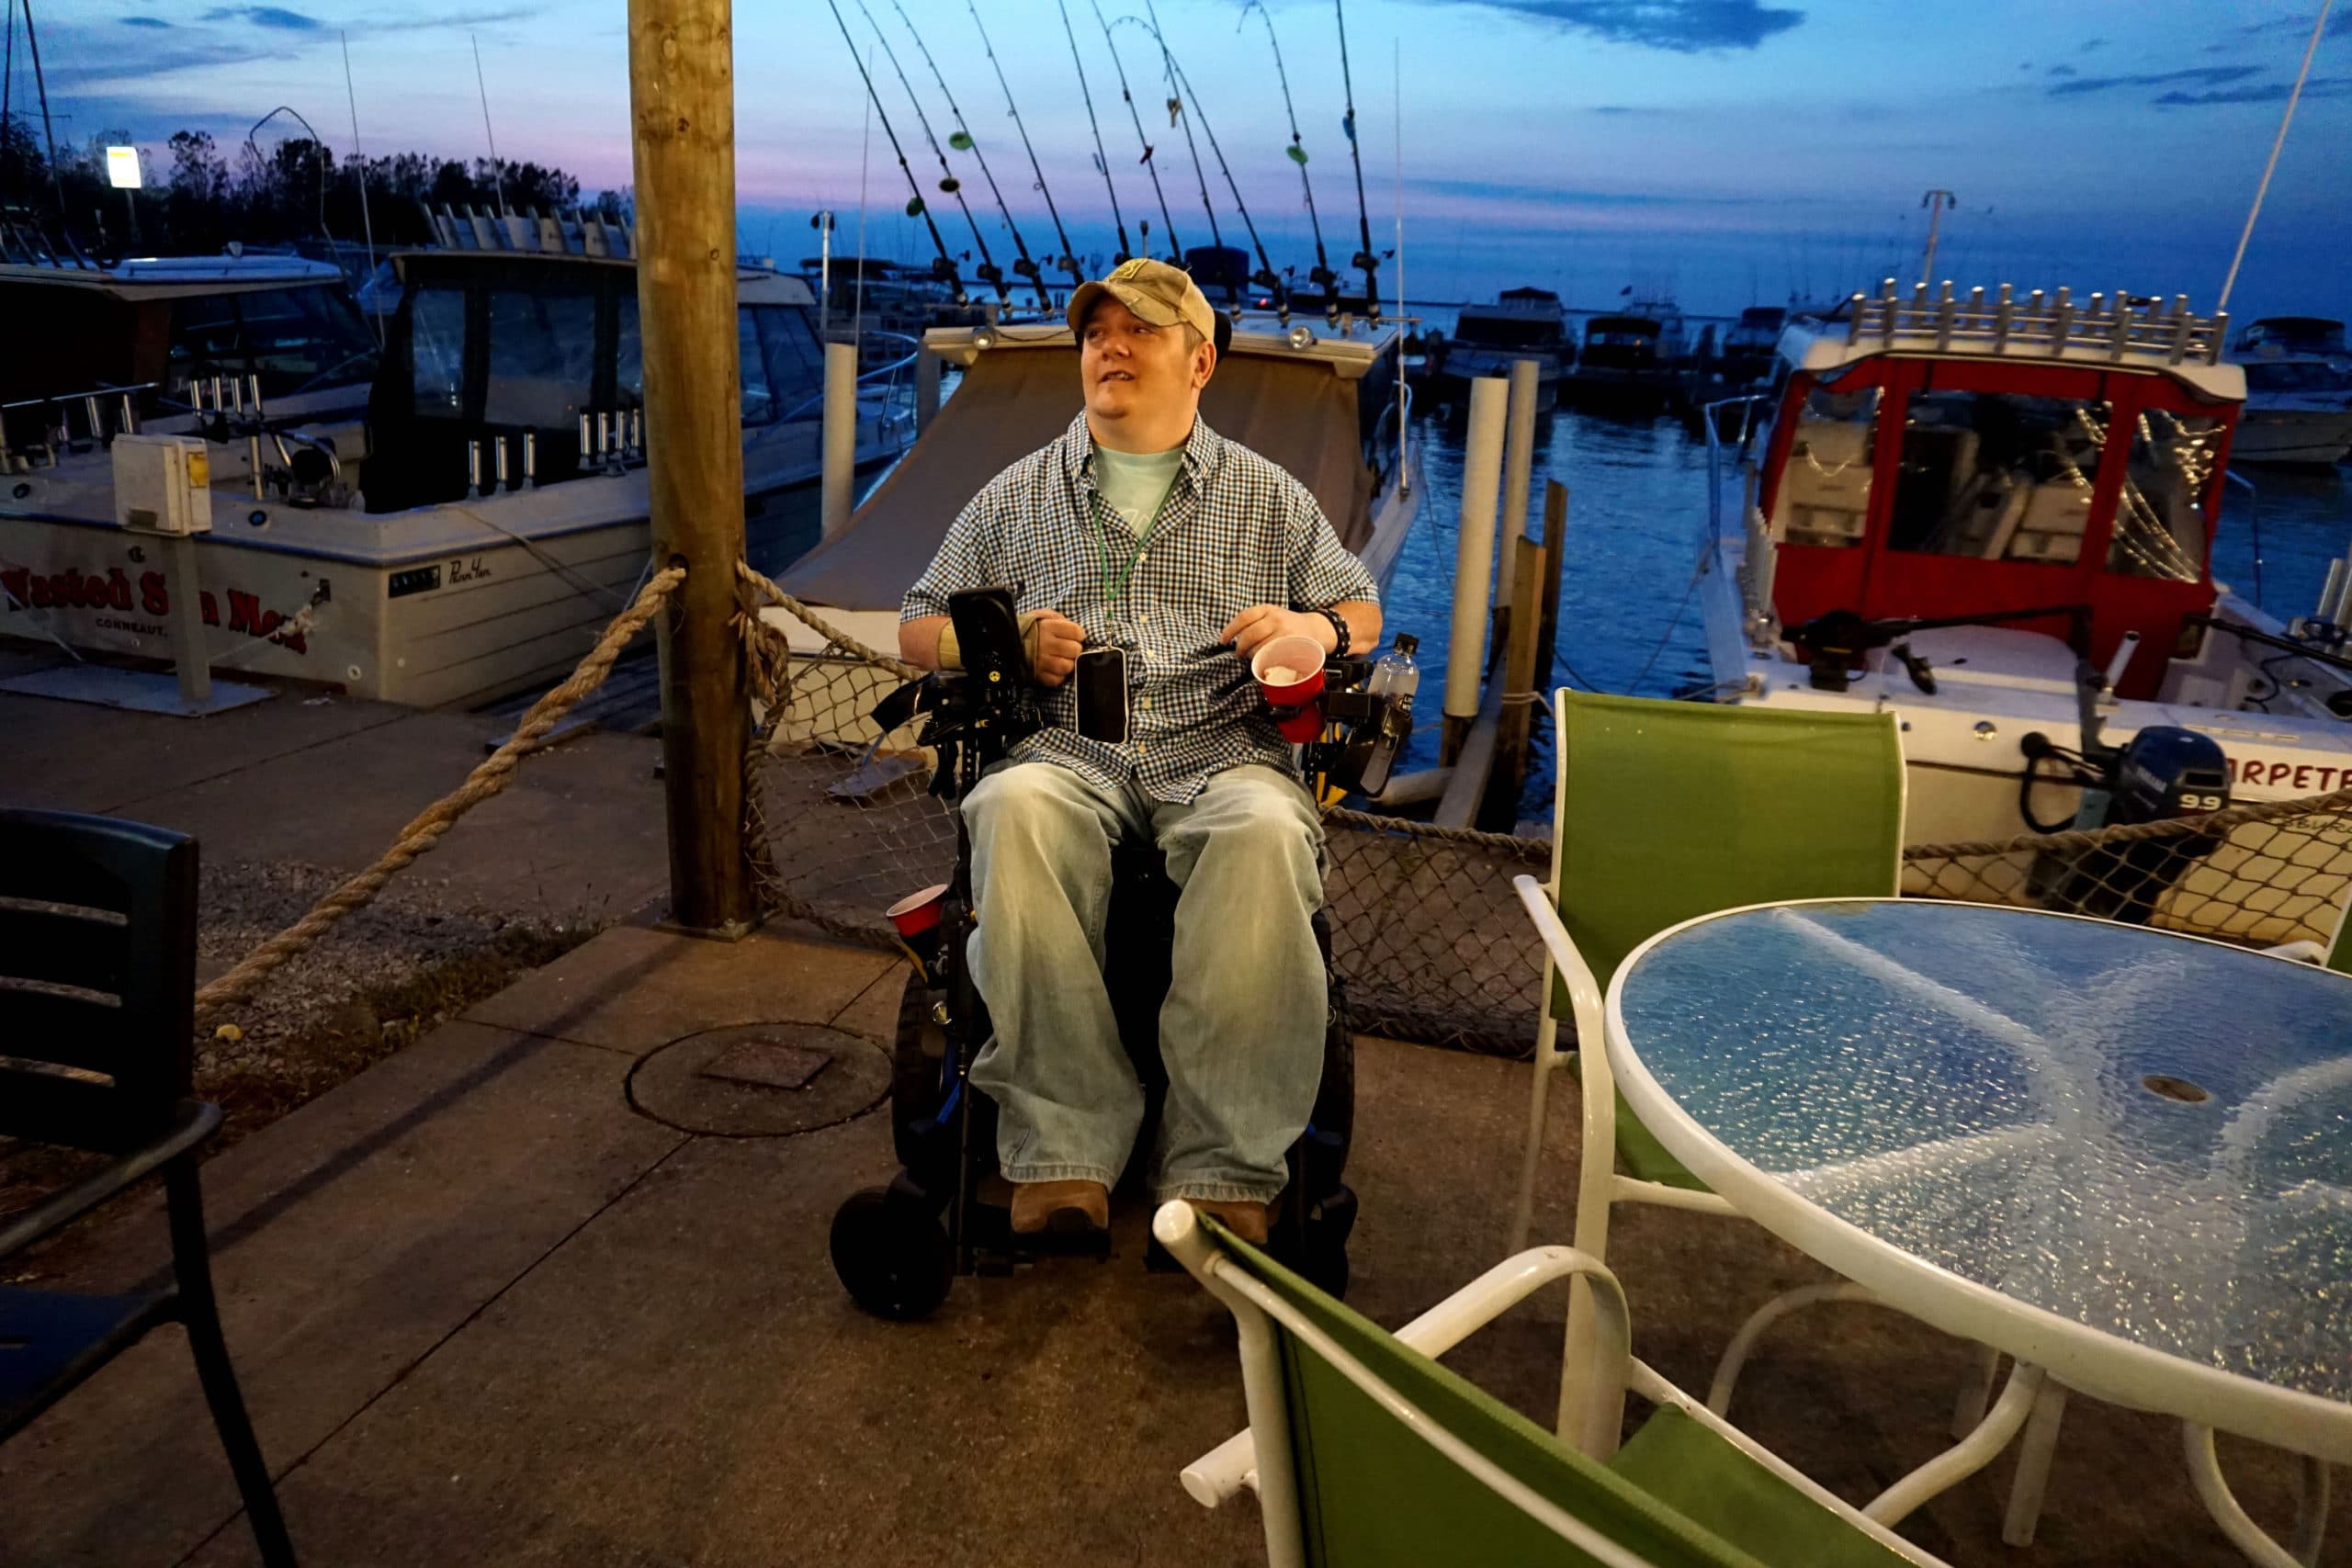 Tim sits in his power wheelchair on a dock. A lake is in the background.